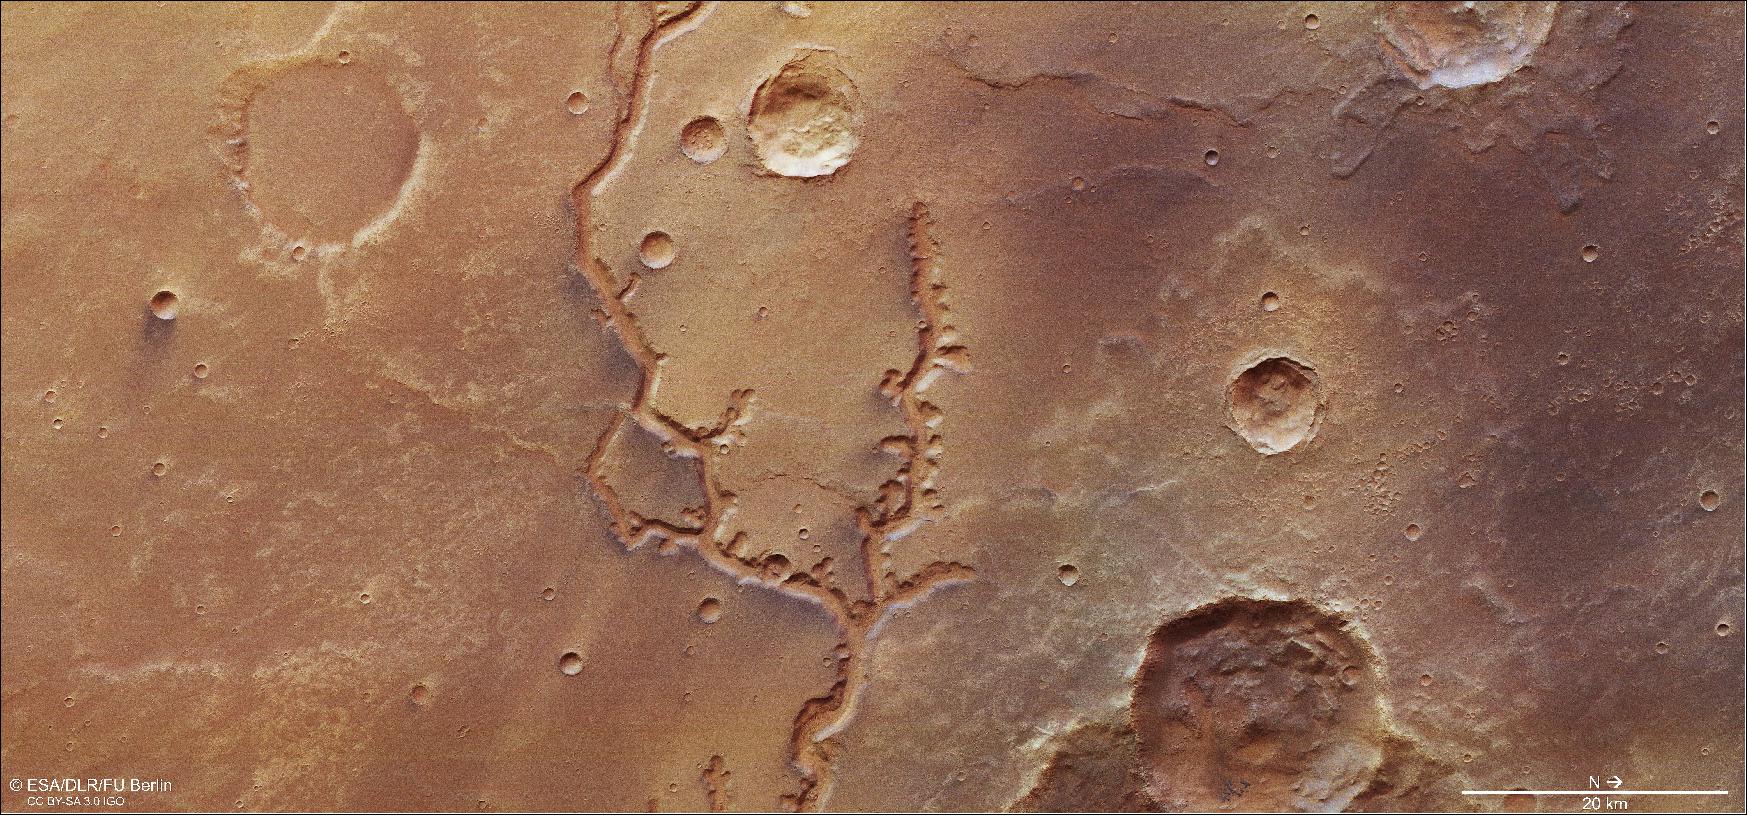 Figure 12: This image from ESA's Mars Express shows a dried-up river valley on Mars named Nirgal Vallis. It comprises data gathered on 16 November 2018 during Mars Express Orbit 18818. The ground resolution is approximately 14 m/pixel and the images are centered at about 315ºE/27ºS. This image was created using data from the nadir and color channels of the High Resolution Stereo Camera. The nadir channel is aligned perpendicular to the surface of Mars, as if looking straight down at the surface. North is to the right (image credit: ESA/DLR/FU Berlin, CC BY-SA 3.0 IGO)